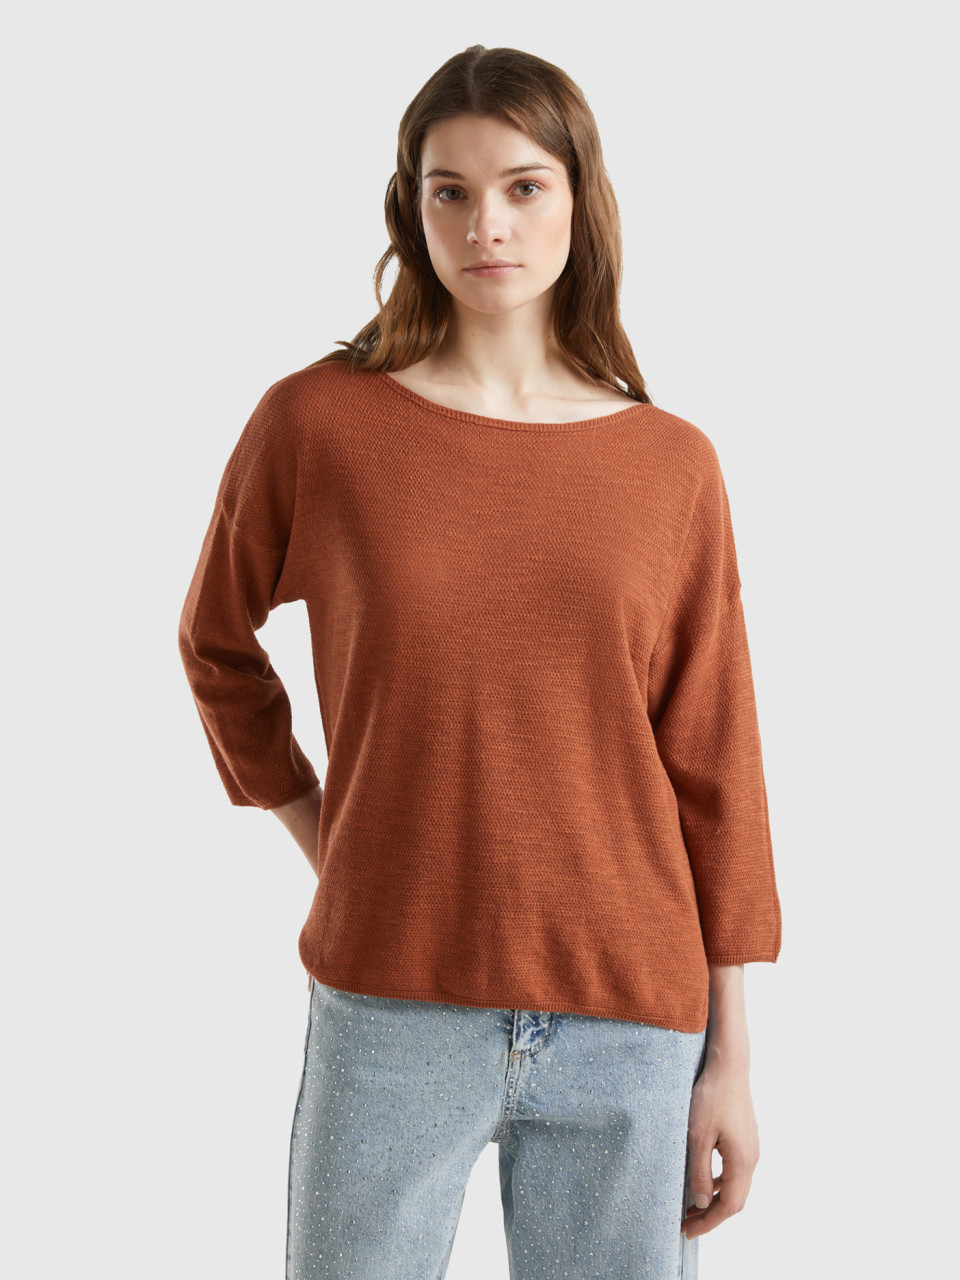 Benetton, Sweater In Linen Blend With 3/4 Sleeves, Brown, Women